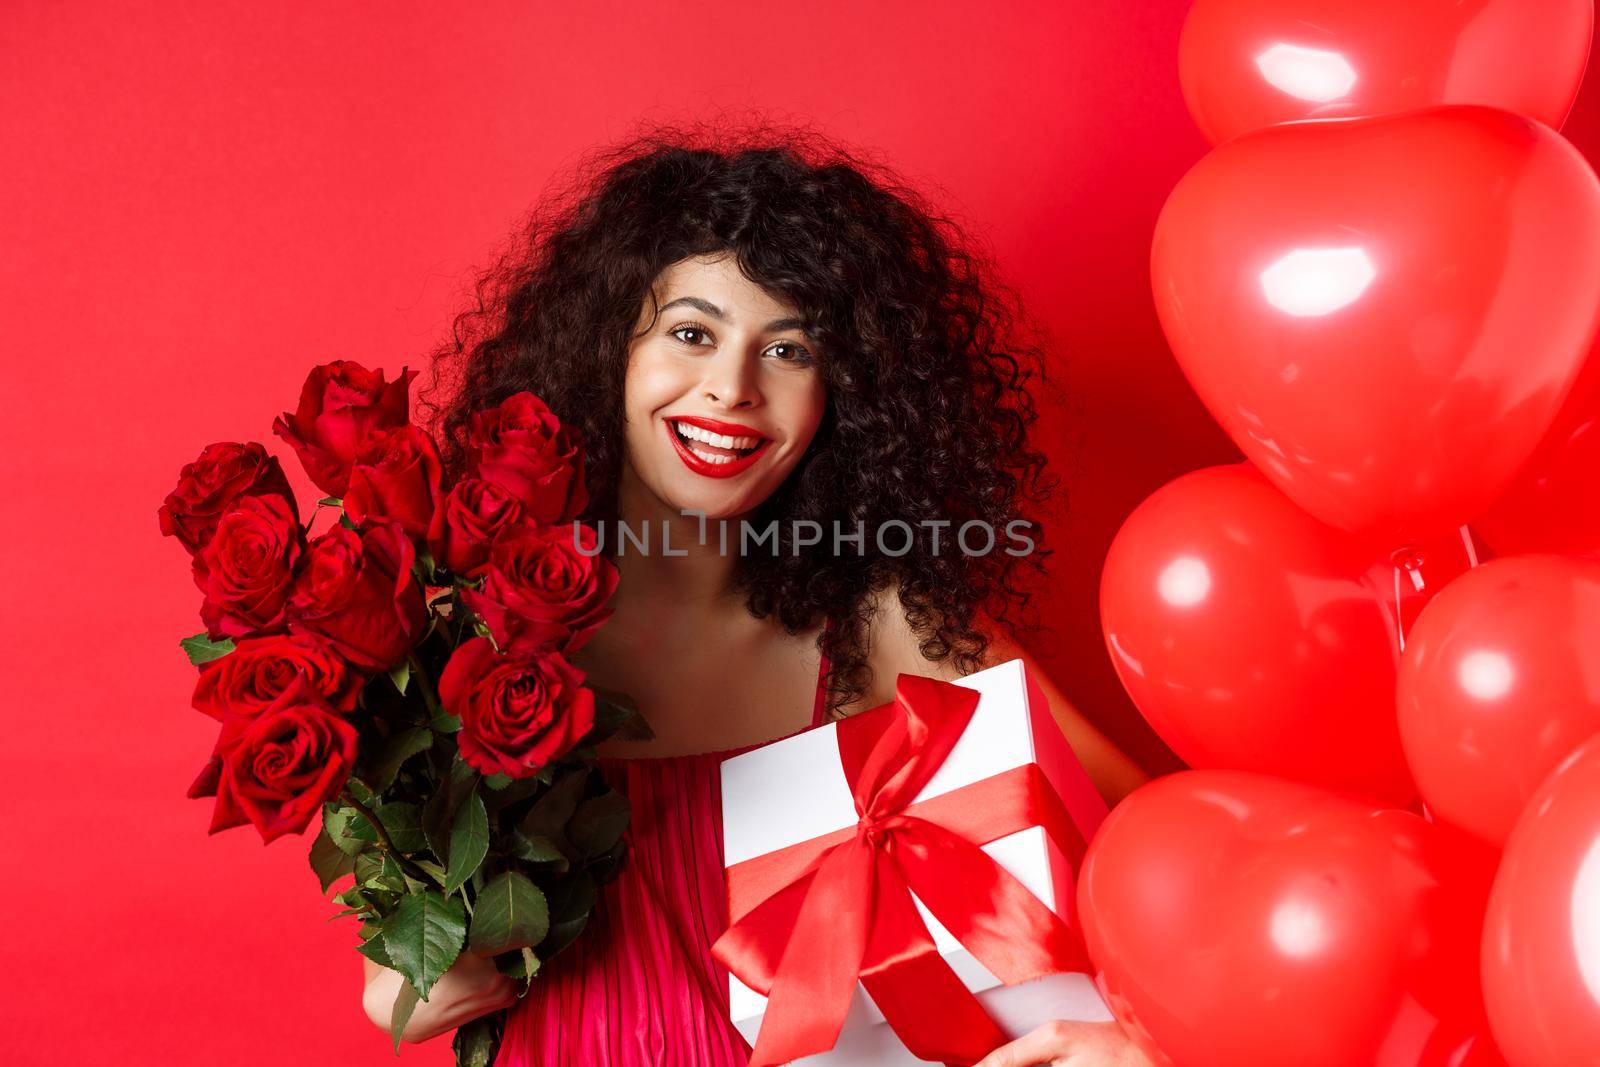 Happy Valentines day. Romantic girl with presents from lover, holding bouquet of roses and gift box, standing near cute red hearts on studio background.